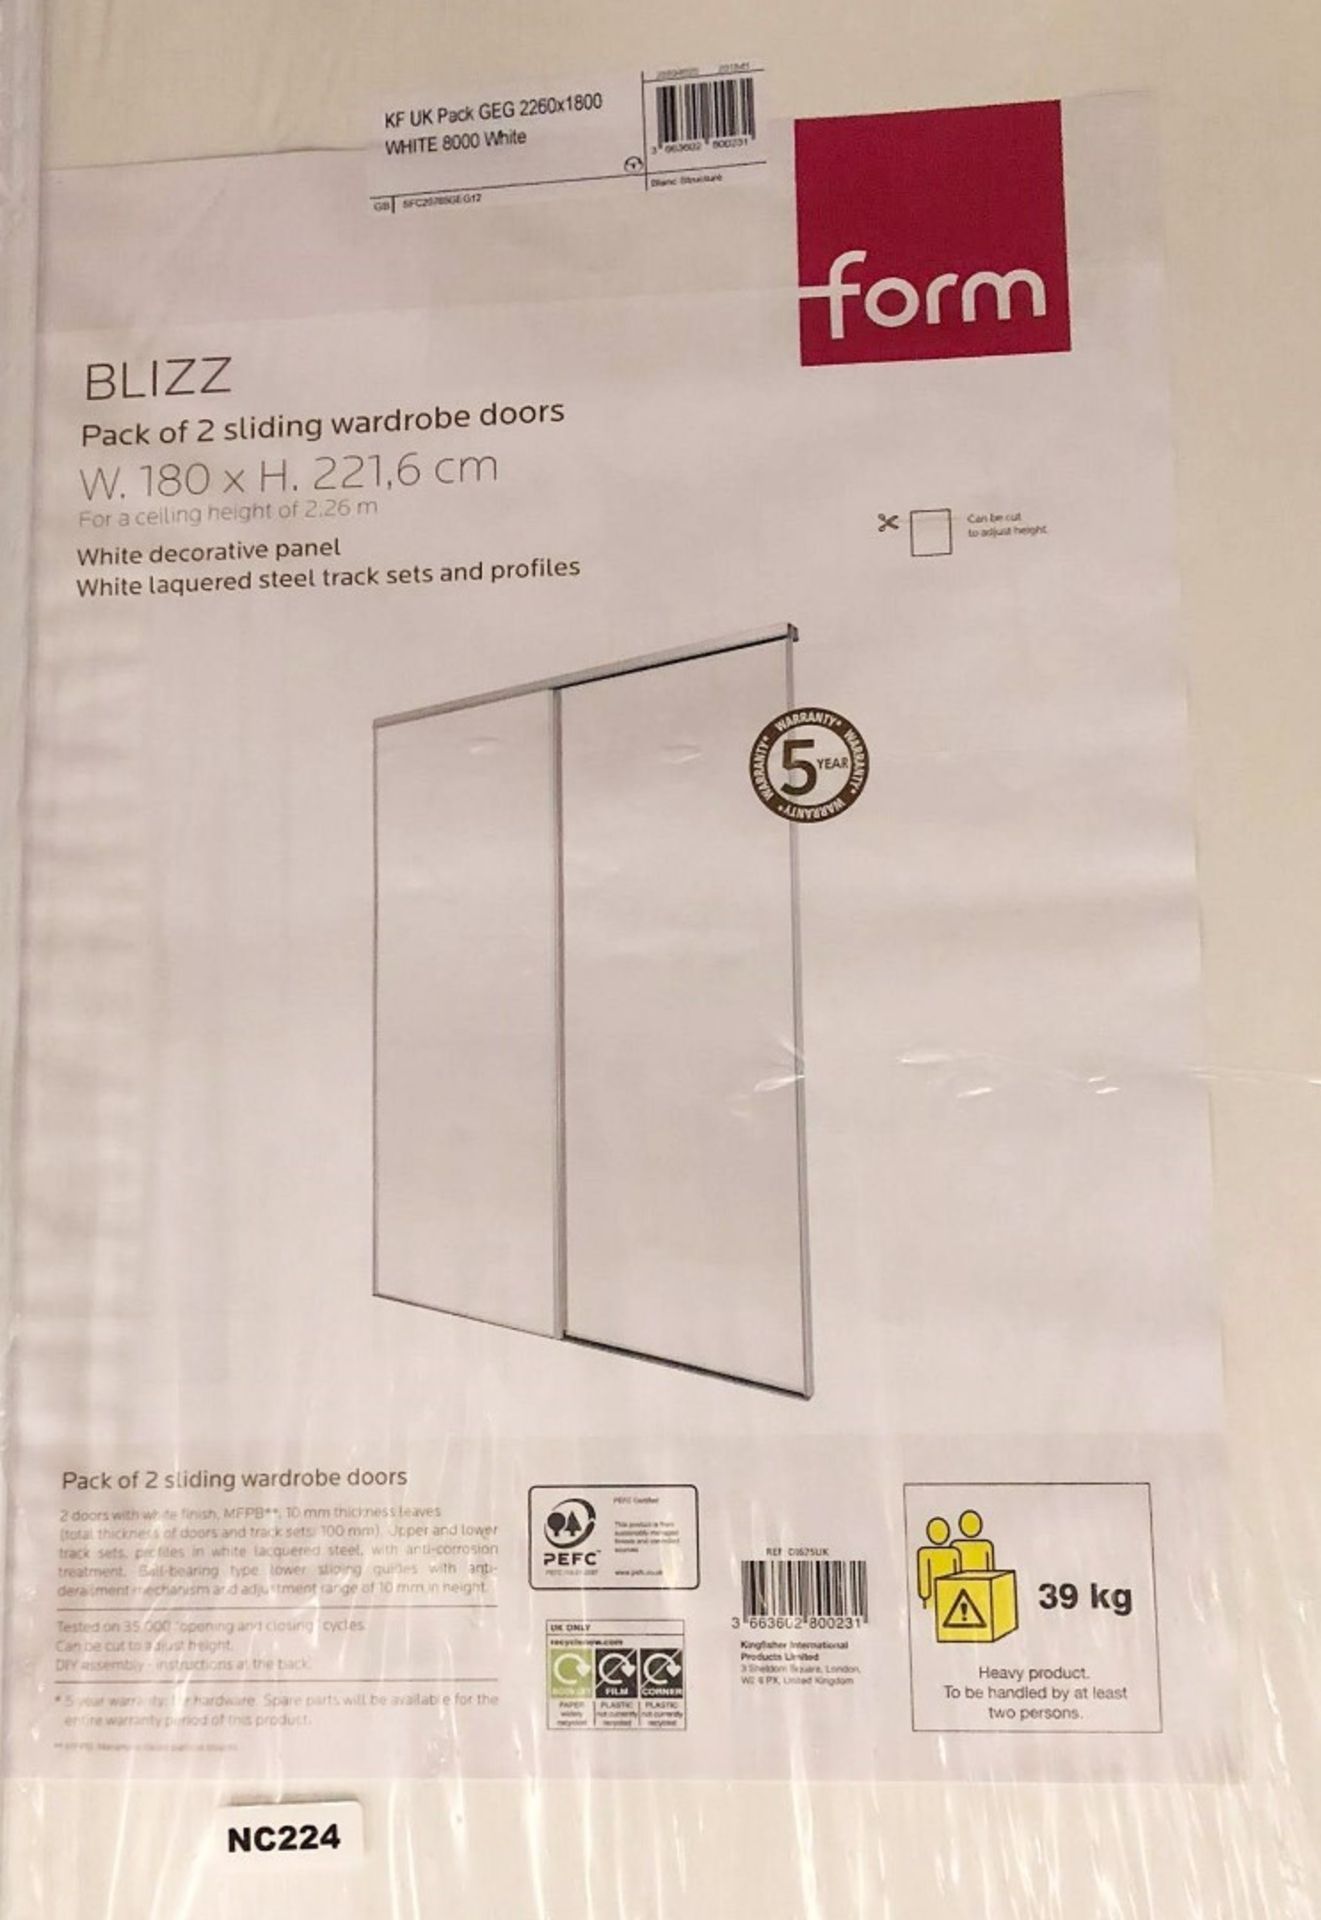 1 x BLIZZ Pack of 2 Sliding Wardrobe Doors In White Decorative Panel With White Lacquered Steel Trac - Image 2 of 3